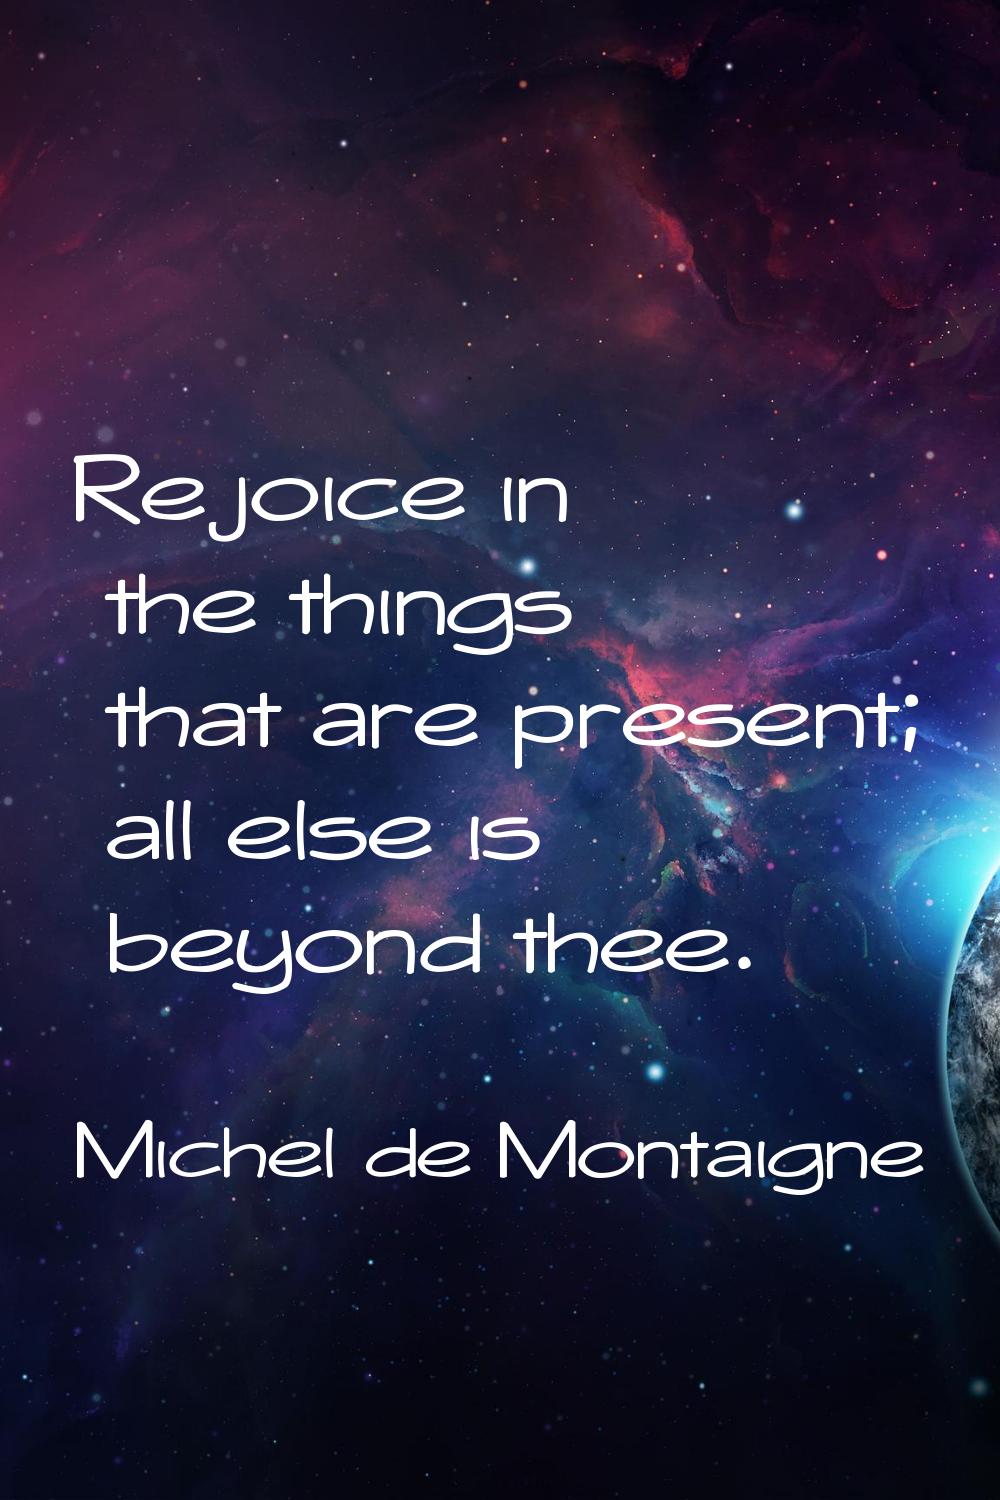 Rejoice in the things that are present; all else is beyond thee.